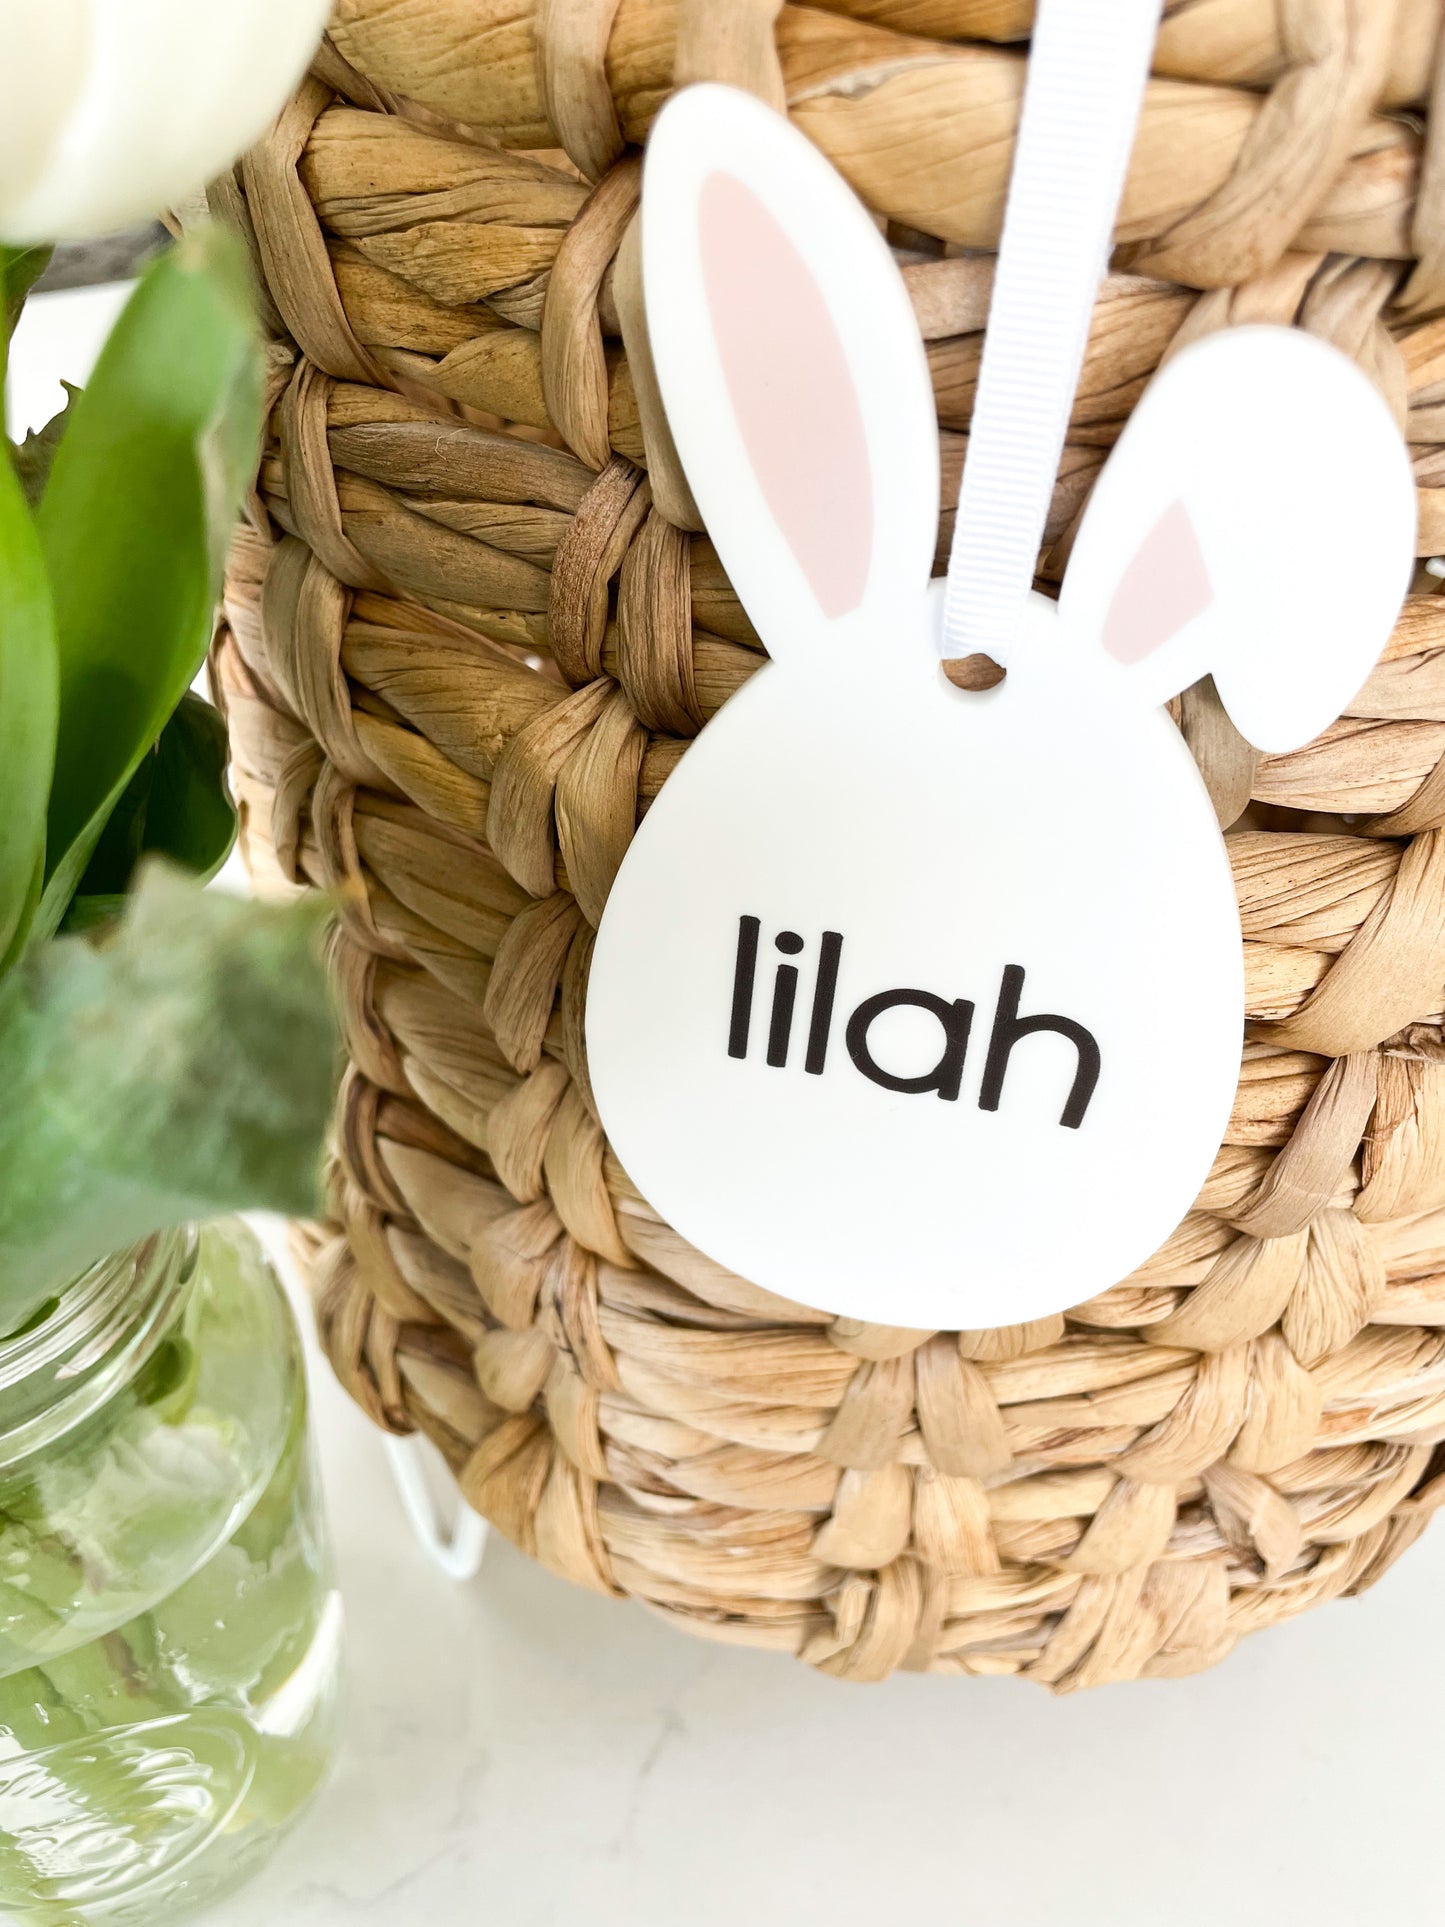 Bunny Ears Easter Tag